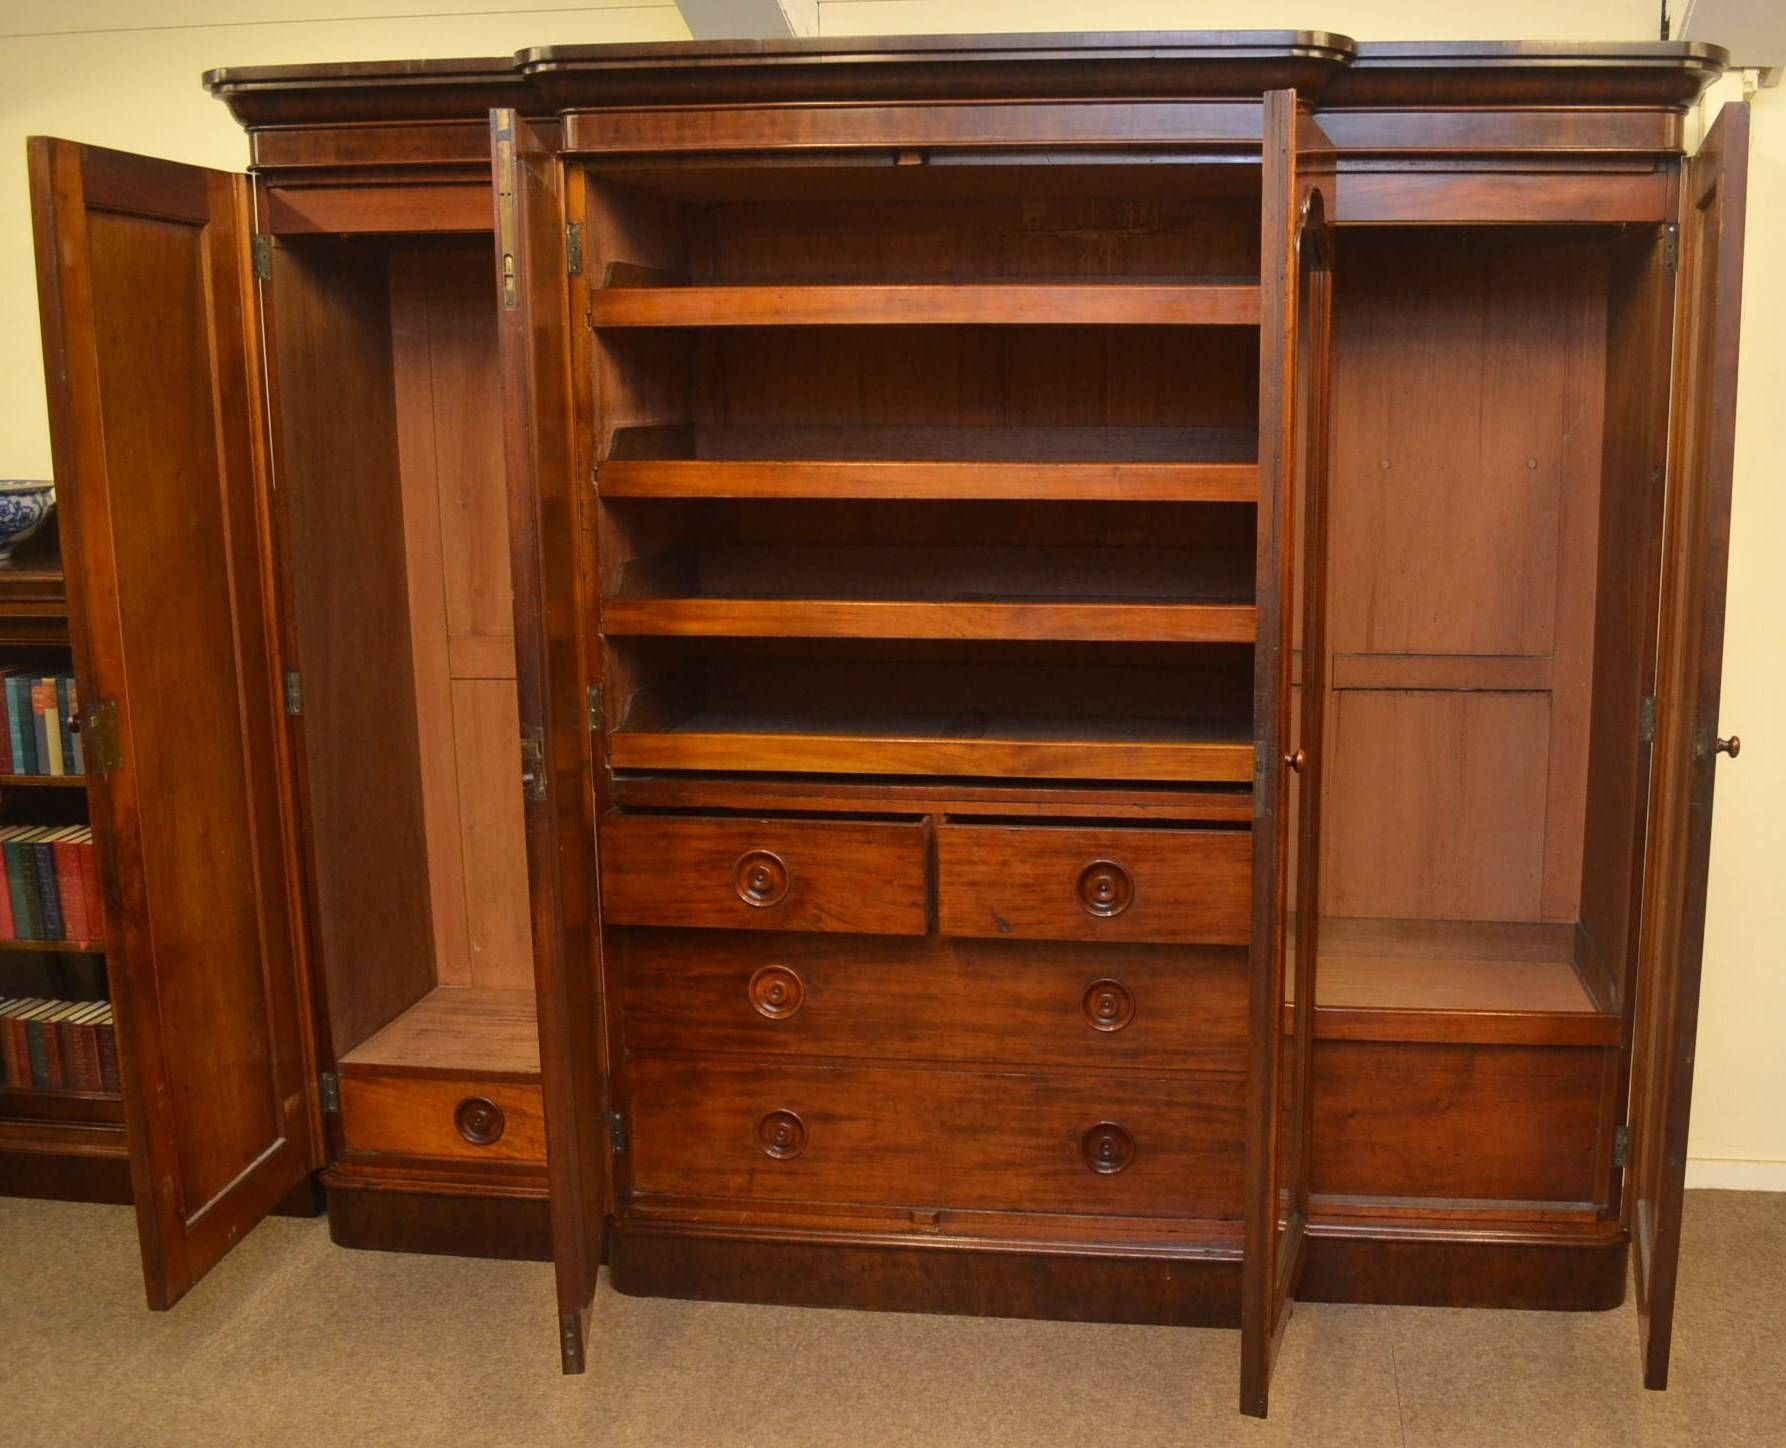 Breakfront Victorian Mahogany Wardrobe C1870 In From Quayside Antiques For Mahogany Breakfront Wardrobe (View 8 of 30)